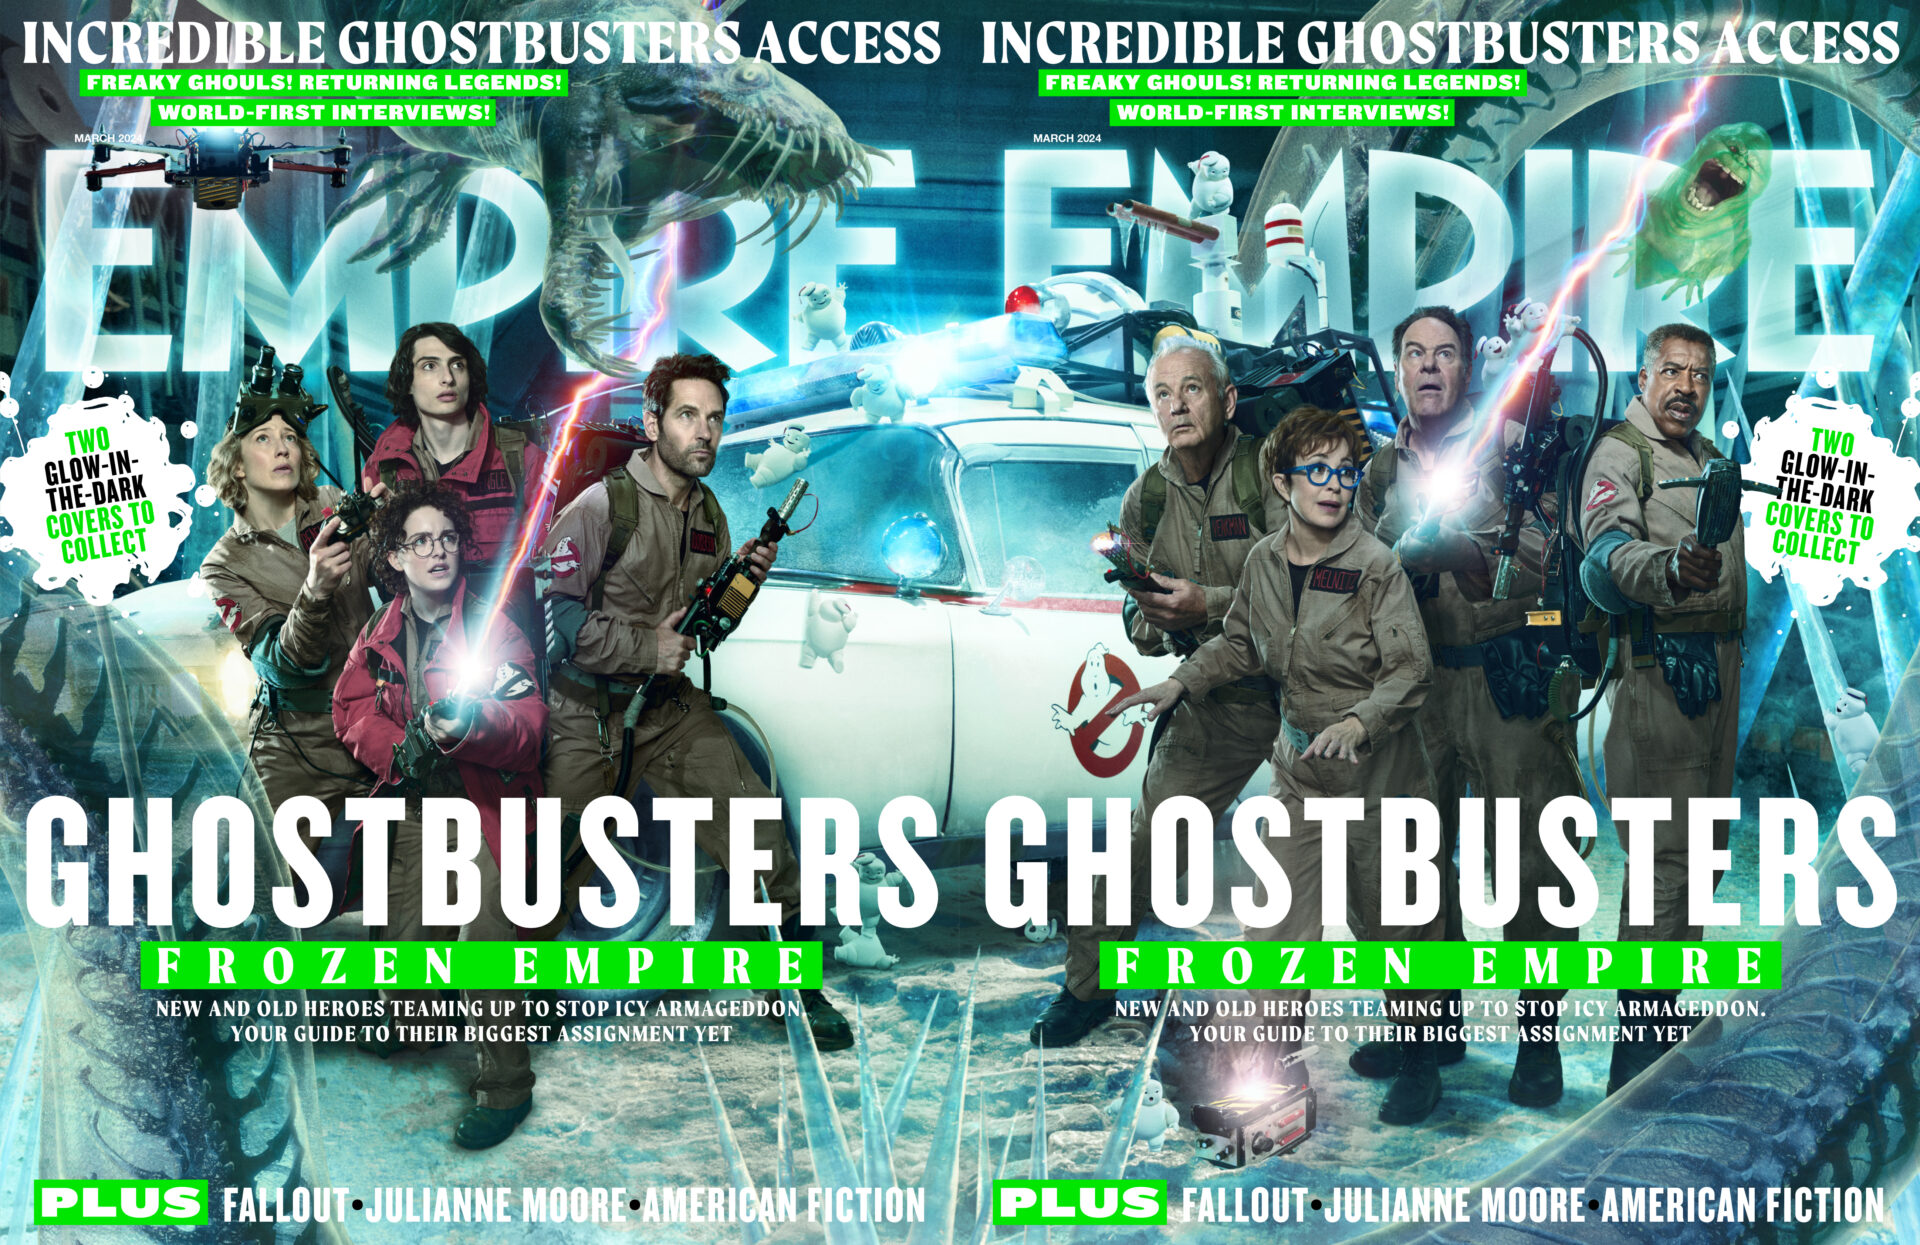 EMPIRE teams up with Ghostbusters on first ever glow-in-the-dark split covers